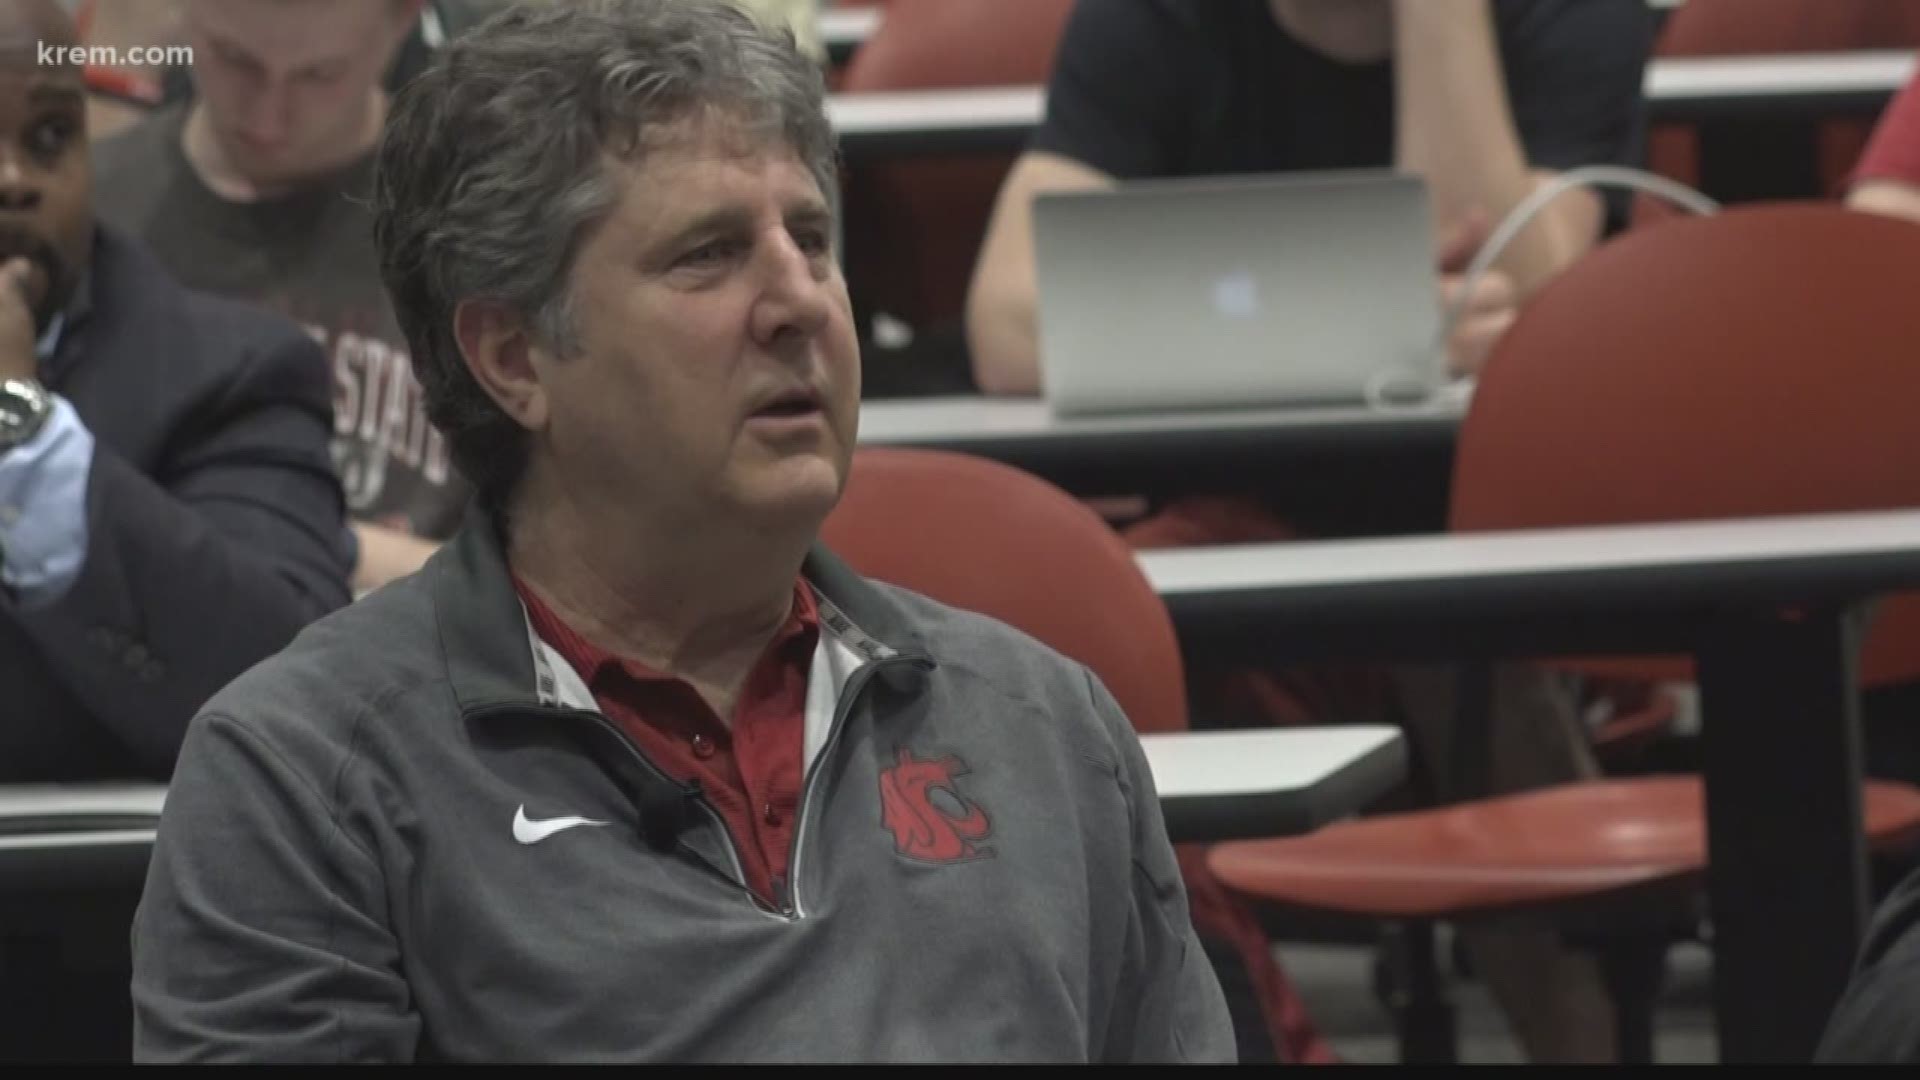 Casey Decker caught the final class of Mike Leach and former State Senator Micheal Baumgartner's Insurgent Warfare and Football Strategy class at WSU. One student who took the course said it was the "best thing to happen" at the school.